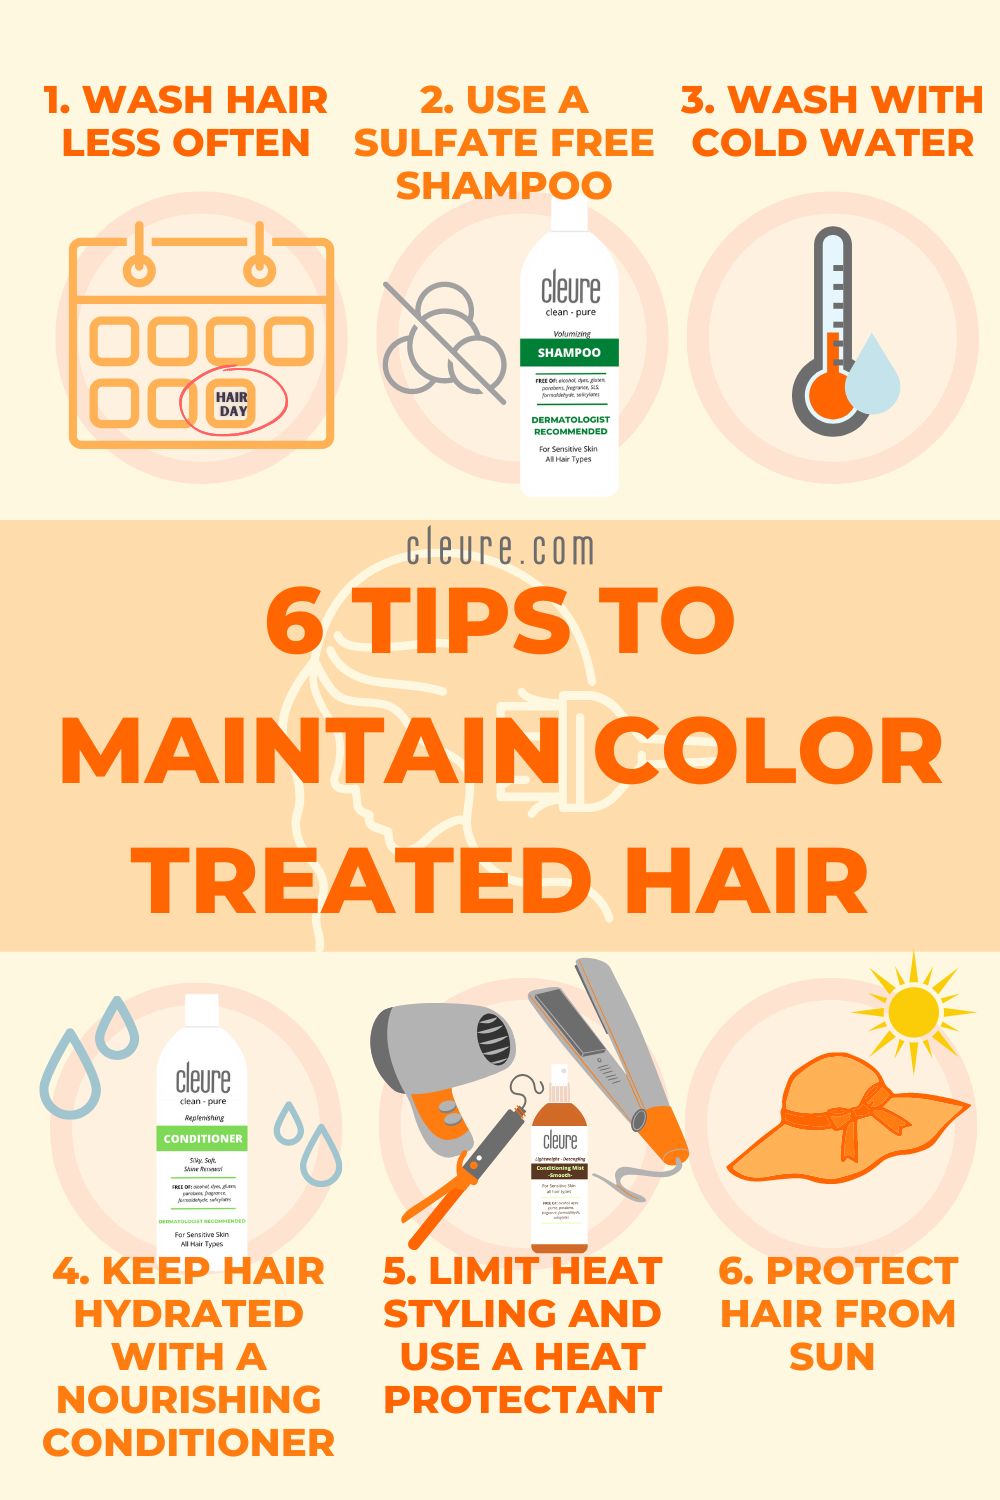 6 tips to maintain color treated hair infographic - Cleure